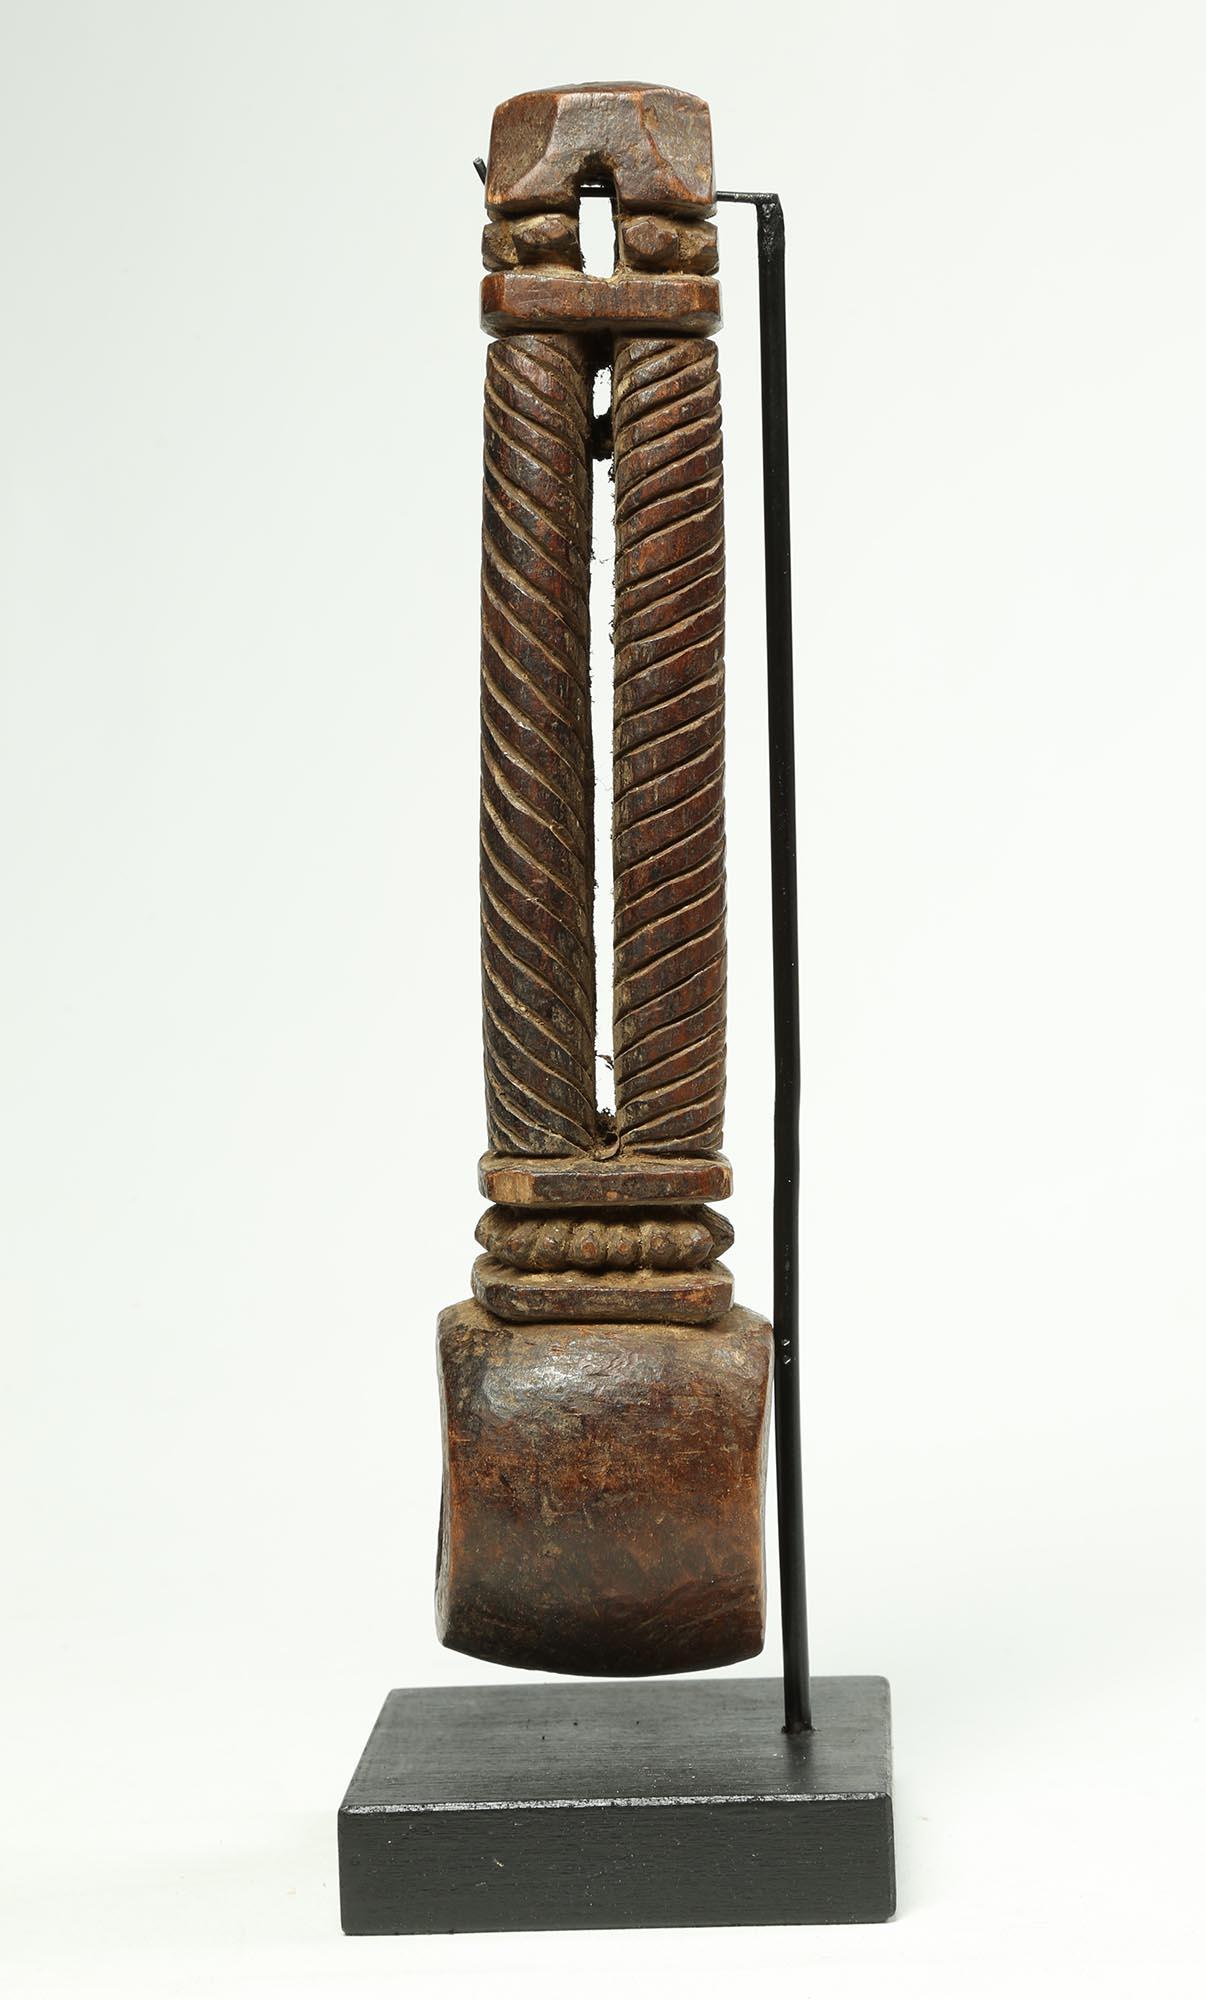 A old carved wood Nepal or Himalayan ghurra butter churn handle, Early 20th Century with four twisted columns connecting at the top. With a worn, polished patina from use, old stabile crack on custom wood and metal base. 9 1/2 inches high, on base